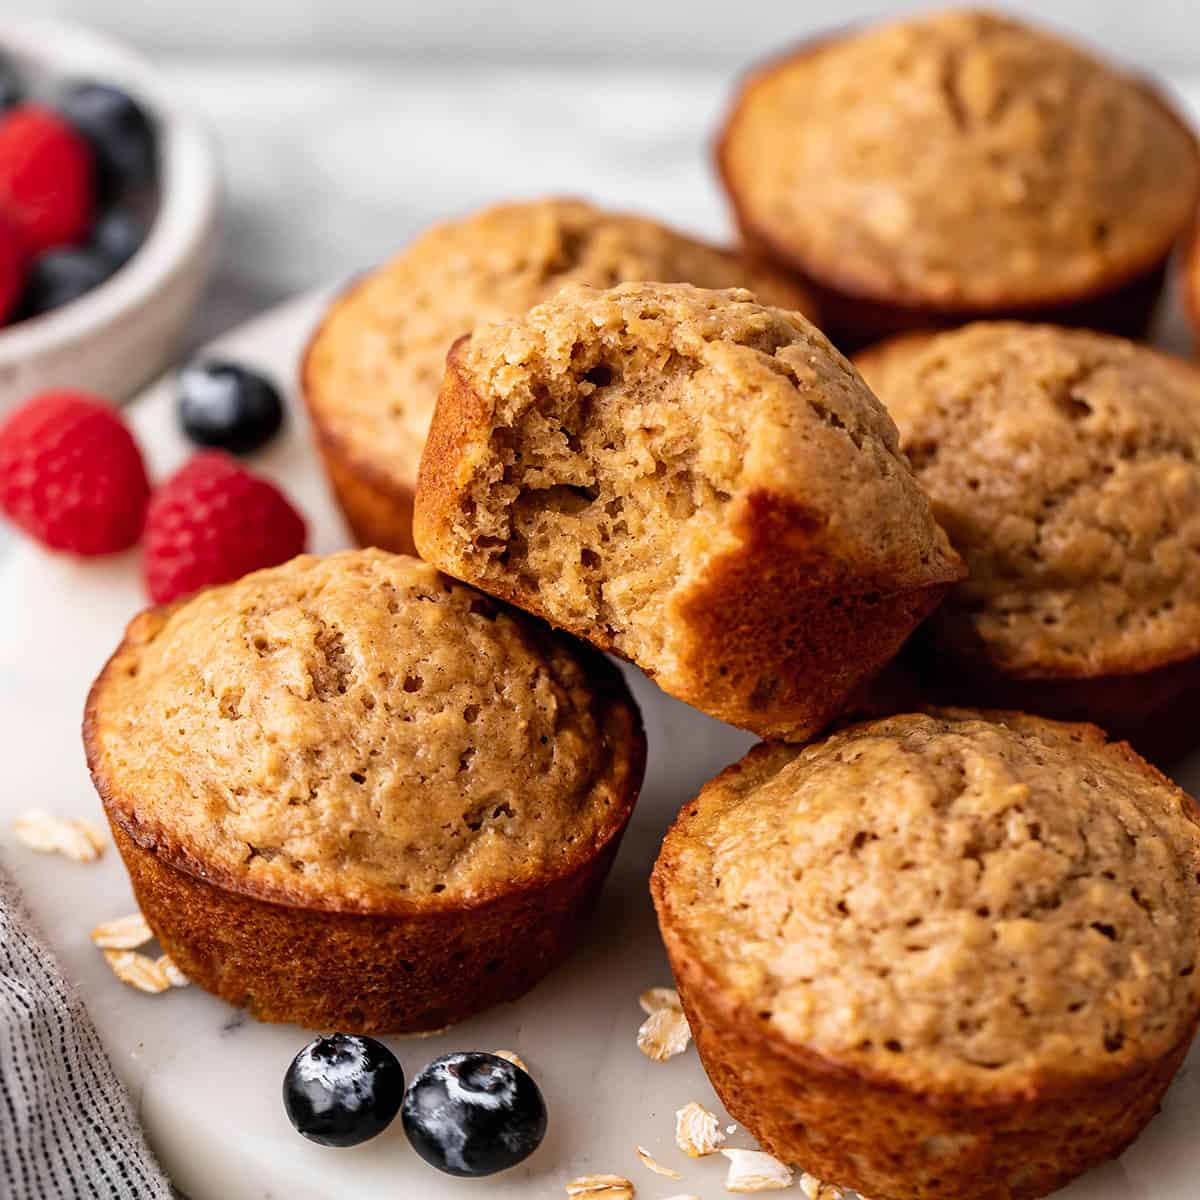 6 Oatmeal Muffins on a serving plate, one with a bite taken out of it